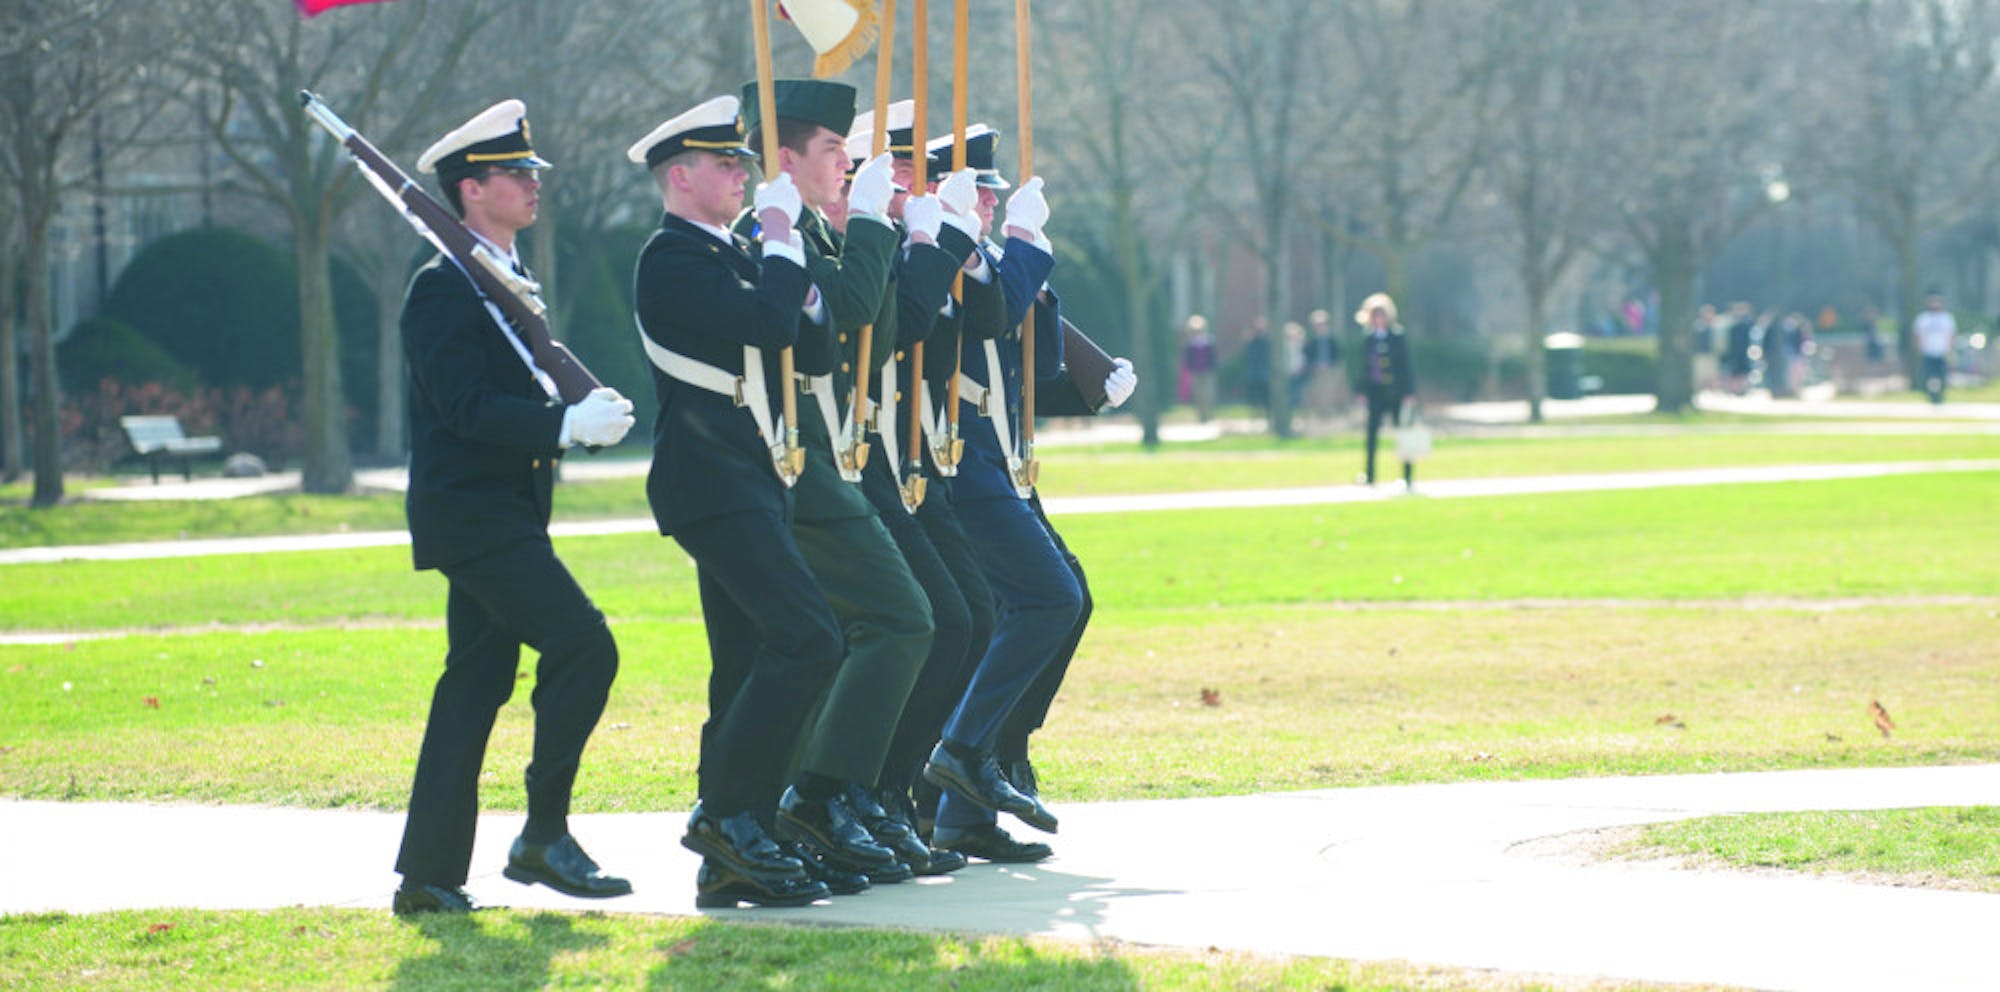 Members of the Navy ROTC participate in the Pass and Review on South Quad on April 9. ROTC members will participate in a 24-hour vigil at the Clarke Memorial Fountain for Veterans Day.